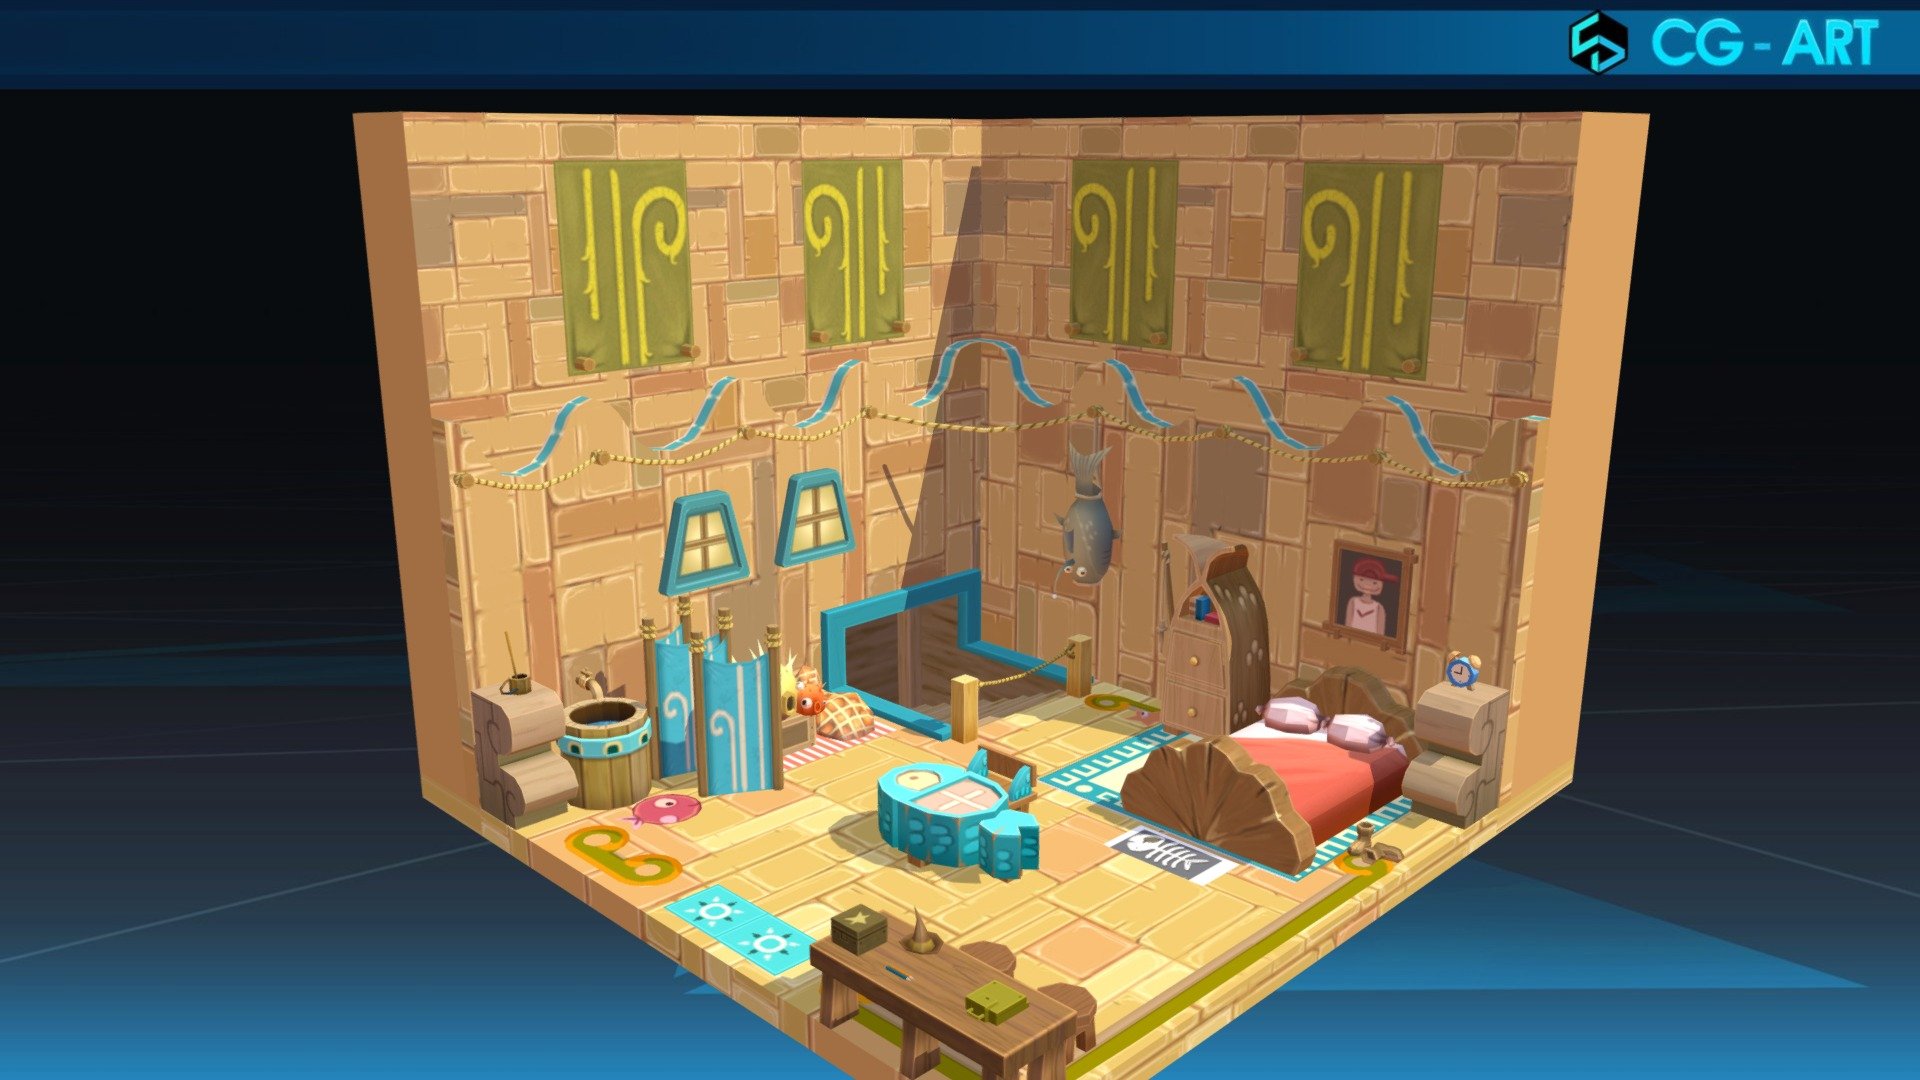 Inspired by the unique design of houses for players in the game Dofus, we continue to turn them into visual 3D models to show our love for this game

Based on the Sufokia House concept of Weequays :

https://www.deviantart.com/weequays/art/Sufokia-House-01-Sufokia-Maison-01-Dofus-311200034

Tools Used
* Maya
* Photoshop - Sufokia Maison 01_Dofus - 3D model by cgart.com (@goart) 3d model